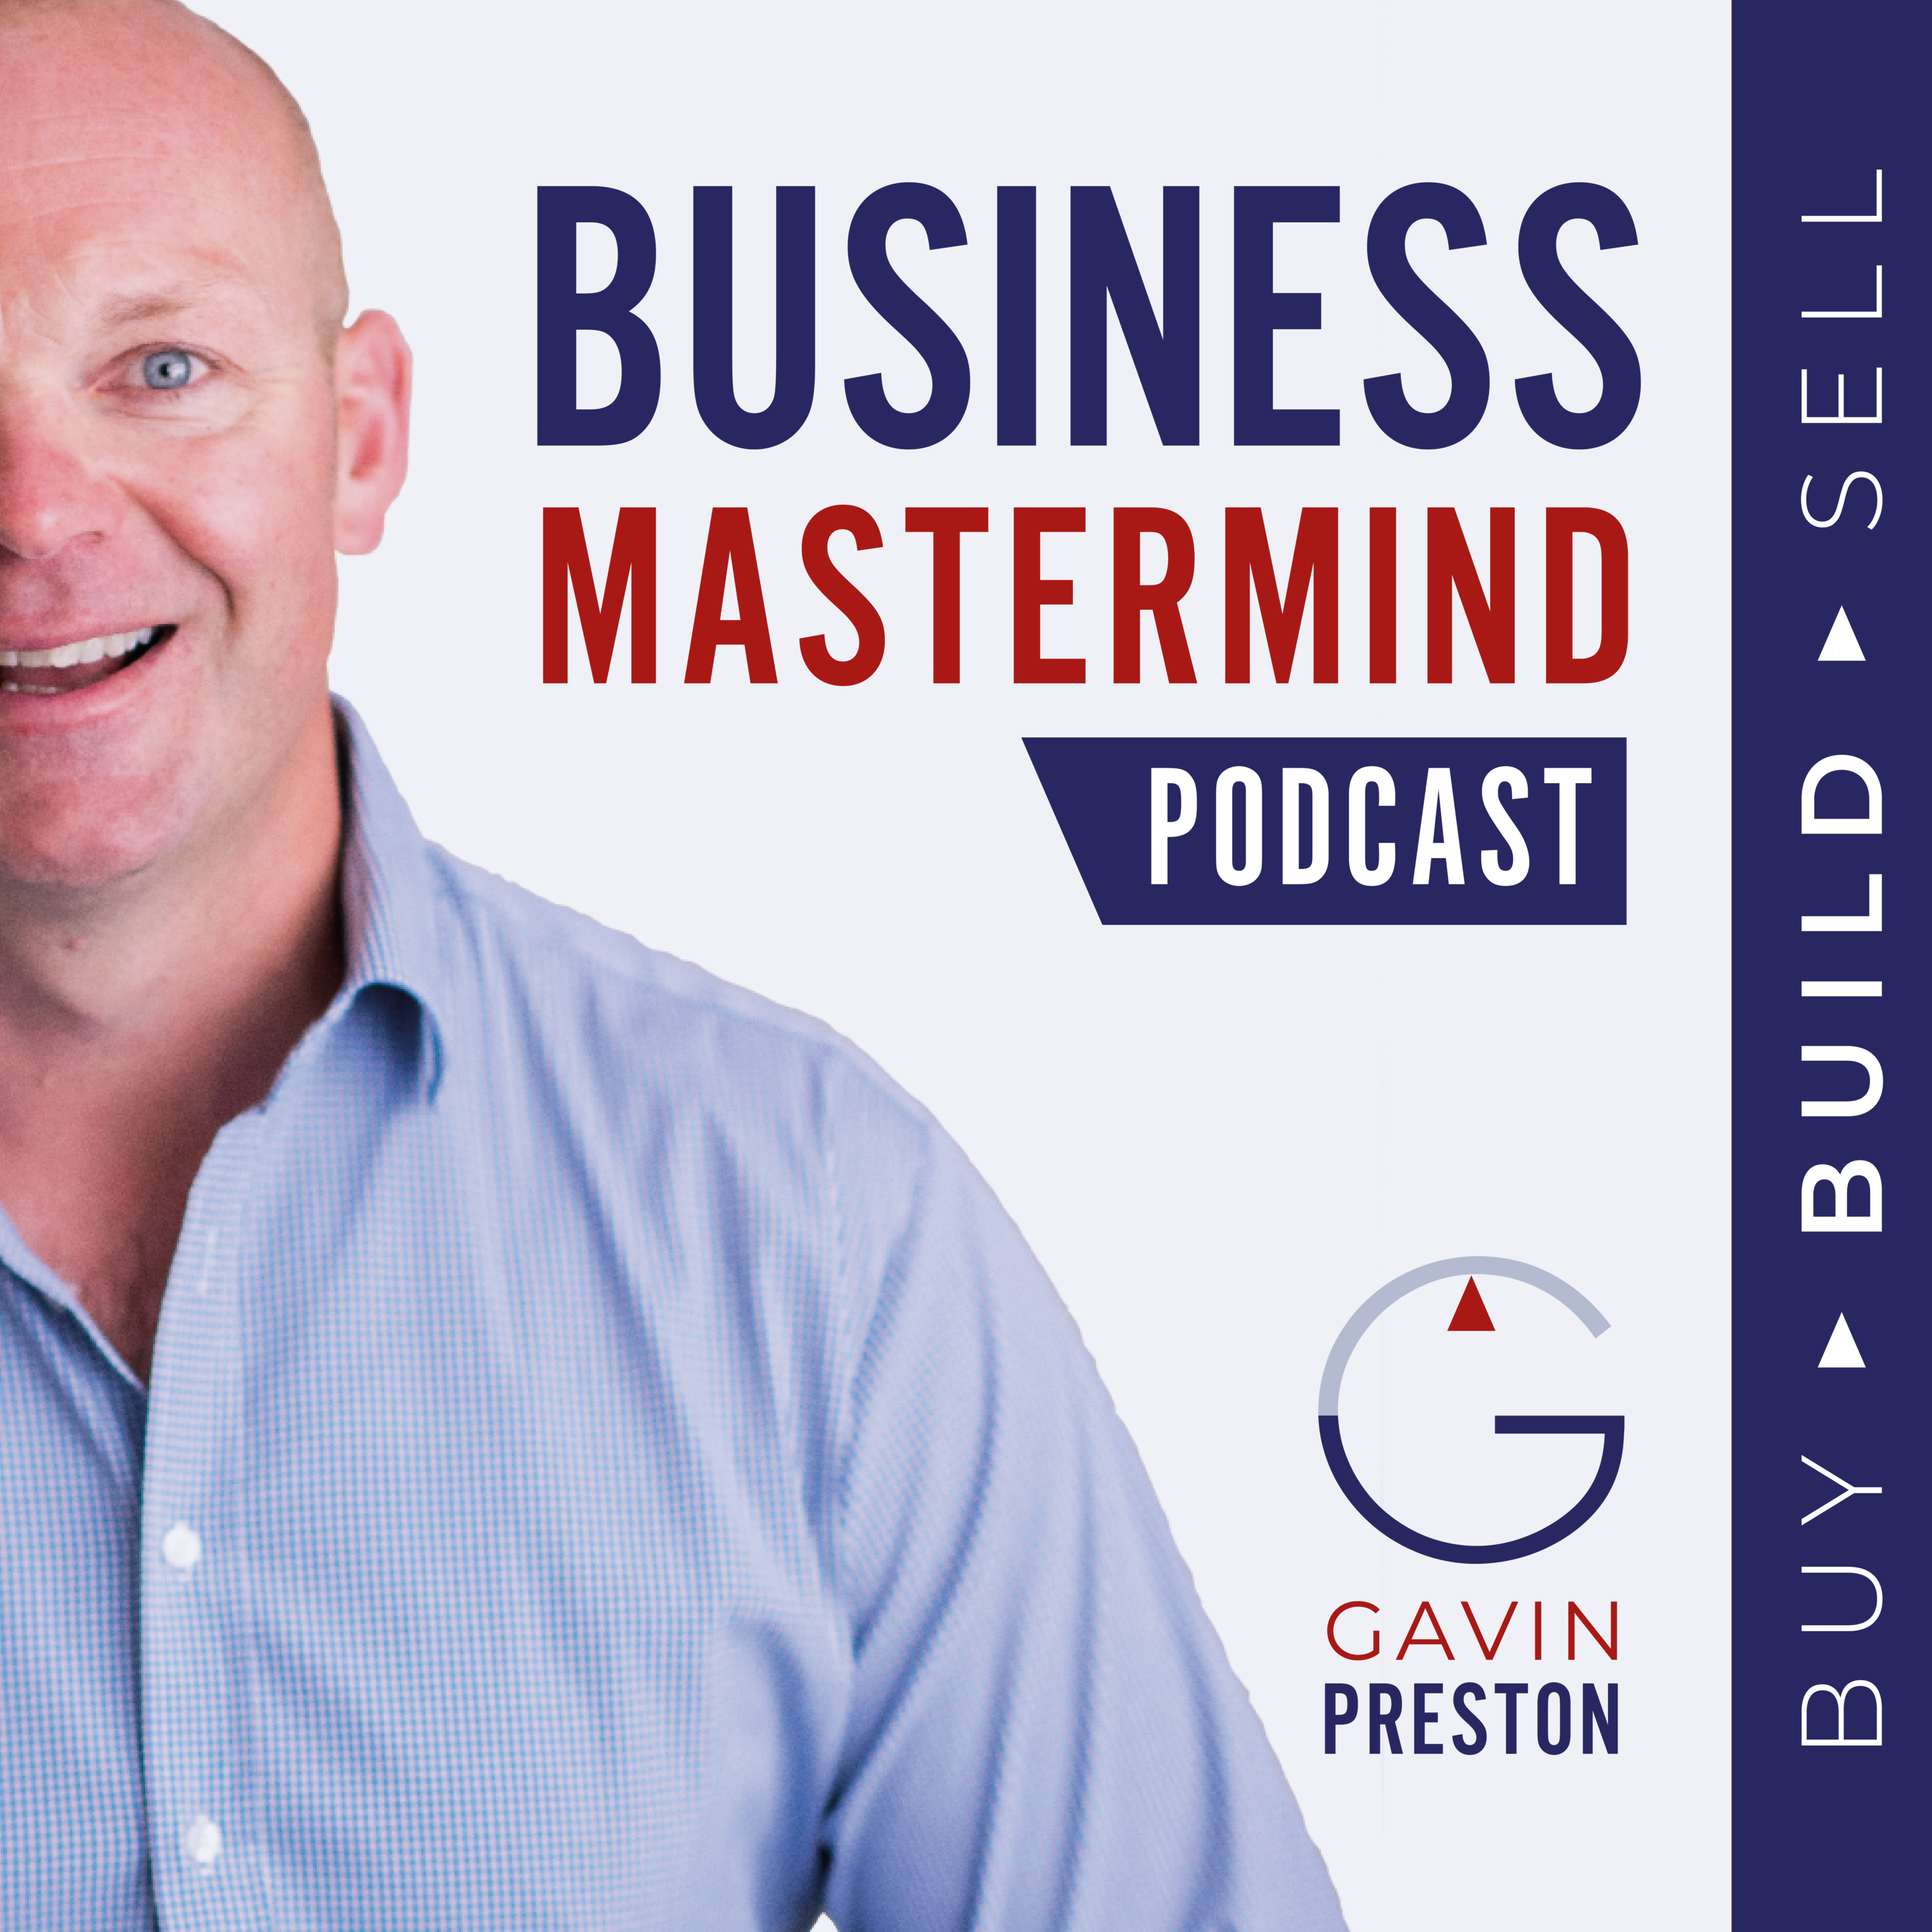 Steve Rodgers On Creating More Productivity, Profit and Purpose In Your Business